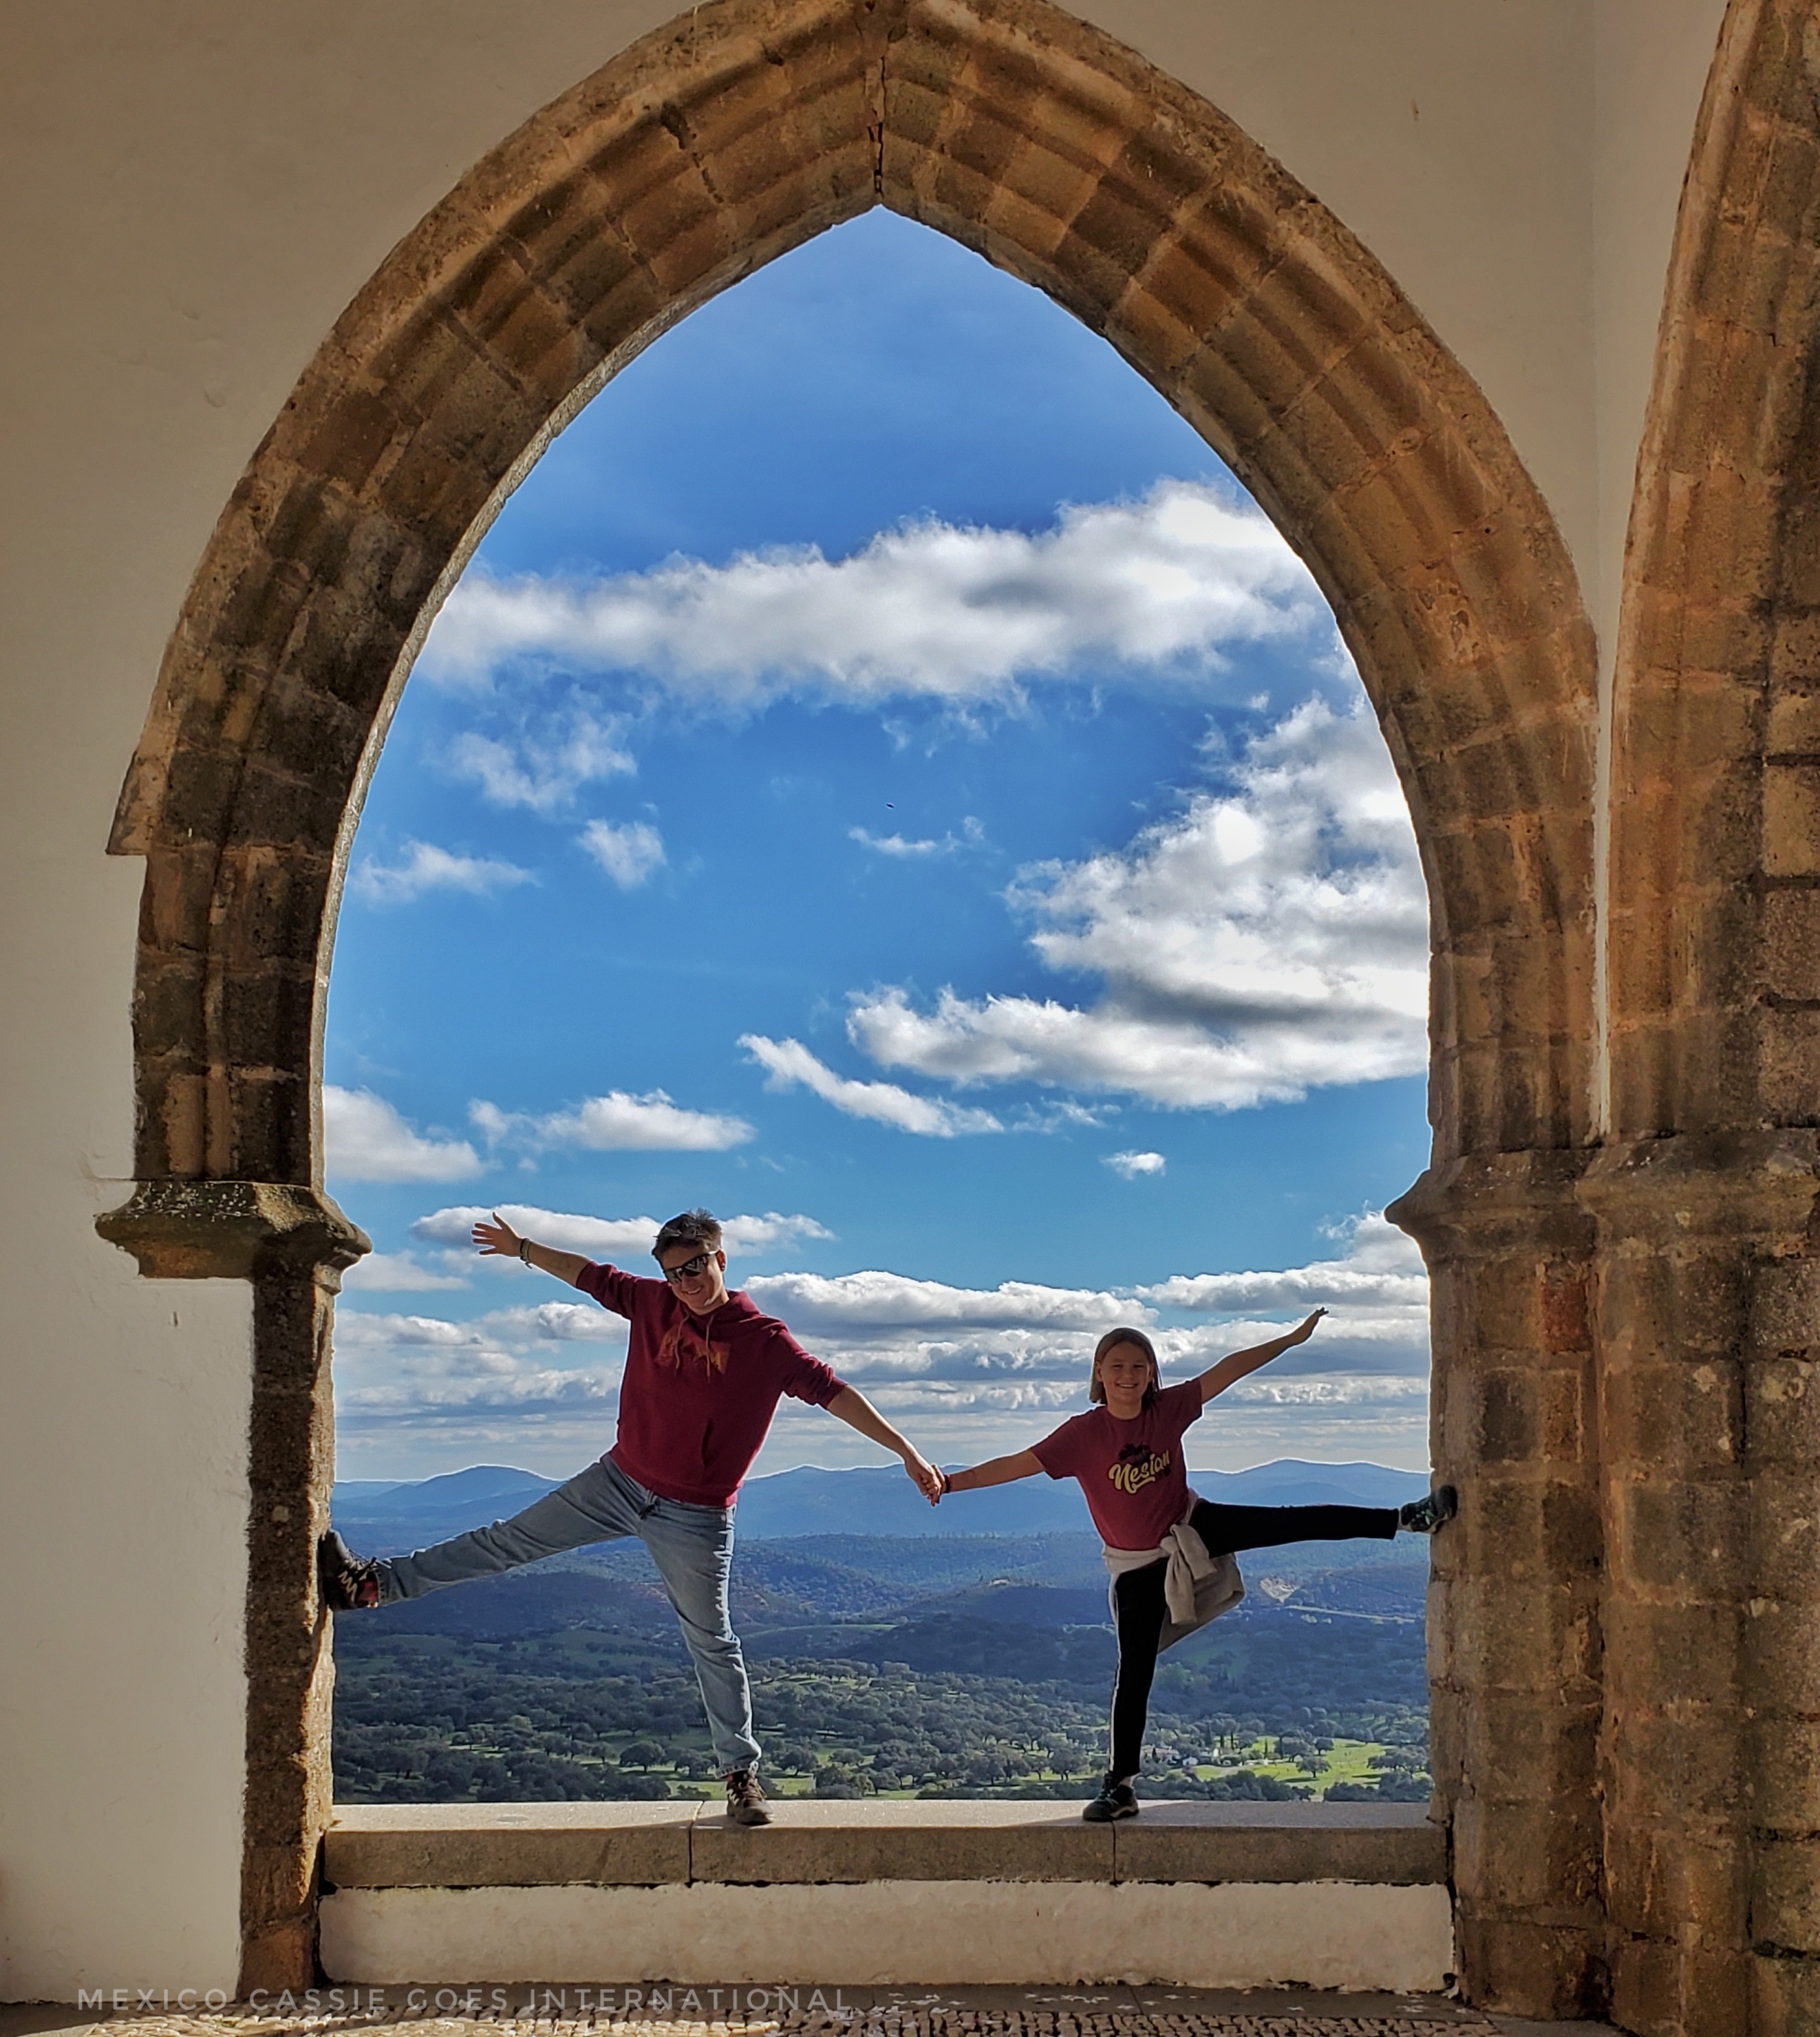 adult and kid standing in large vaulted window both on one leg with other leg against a wall. They're holding hands.